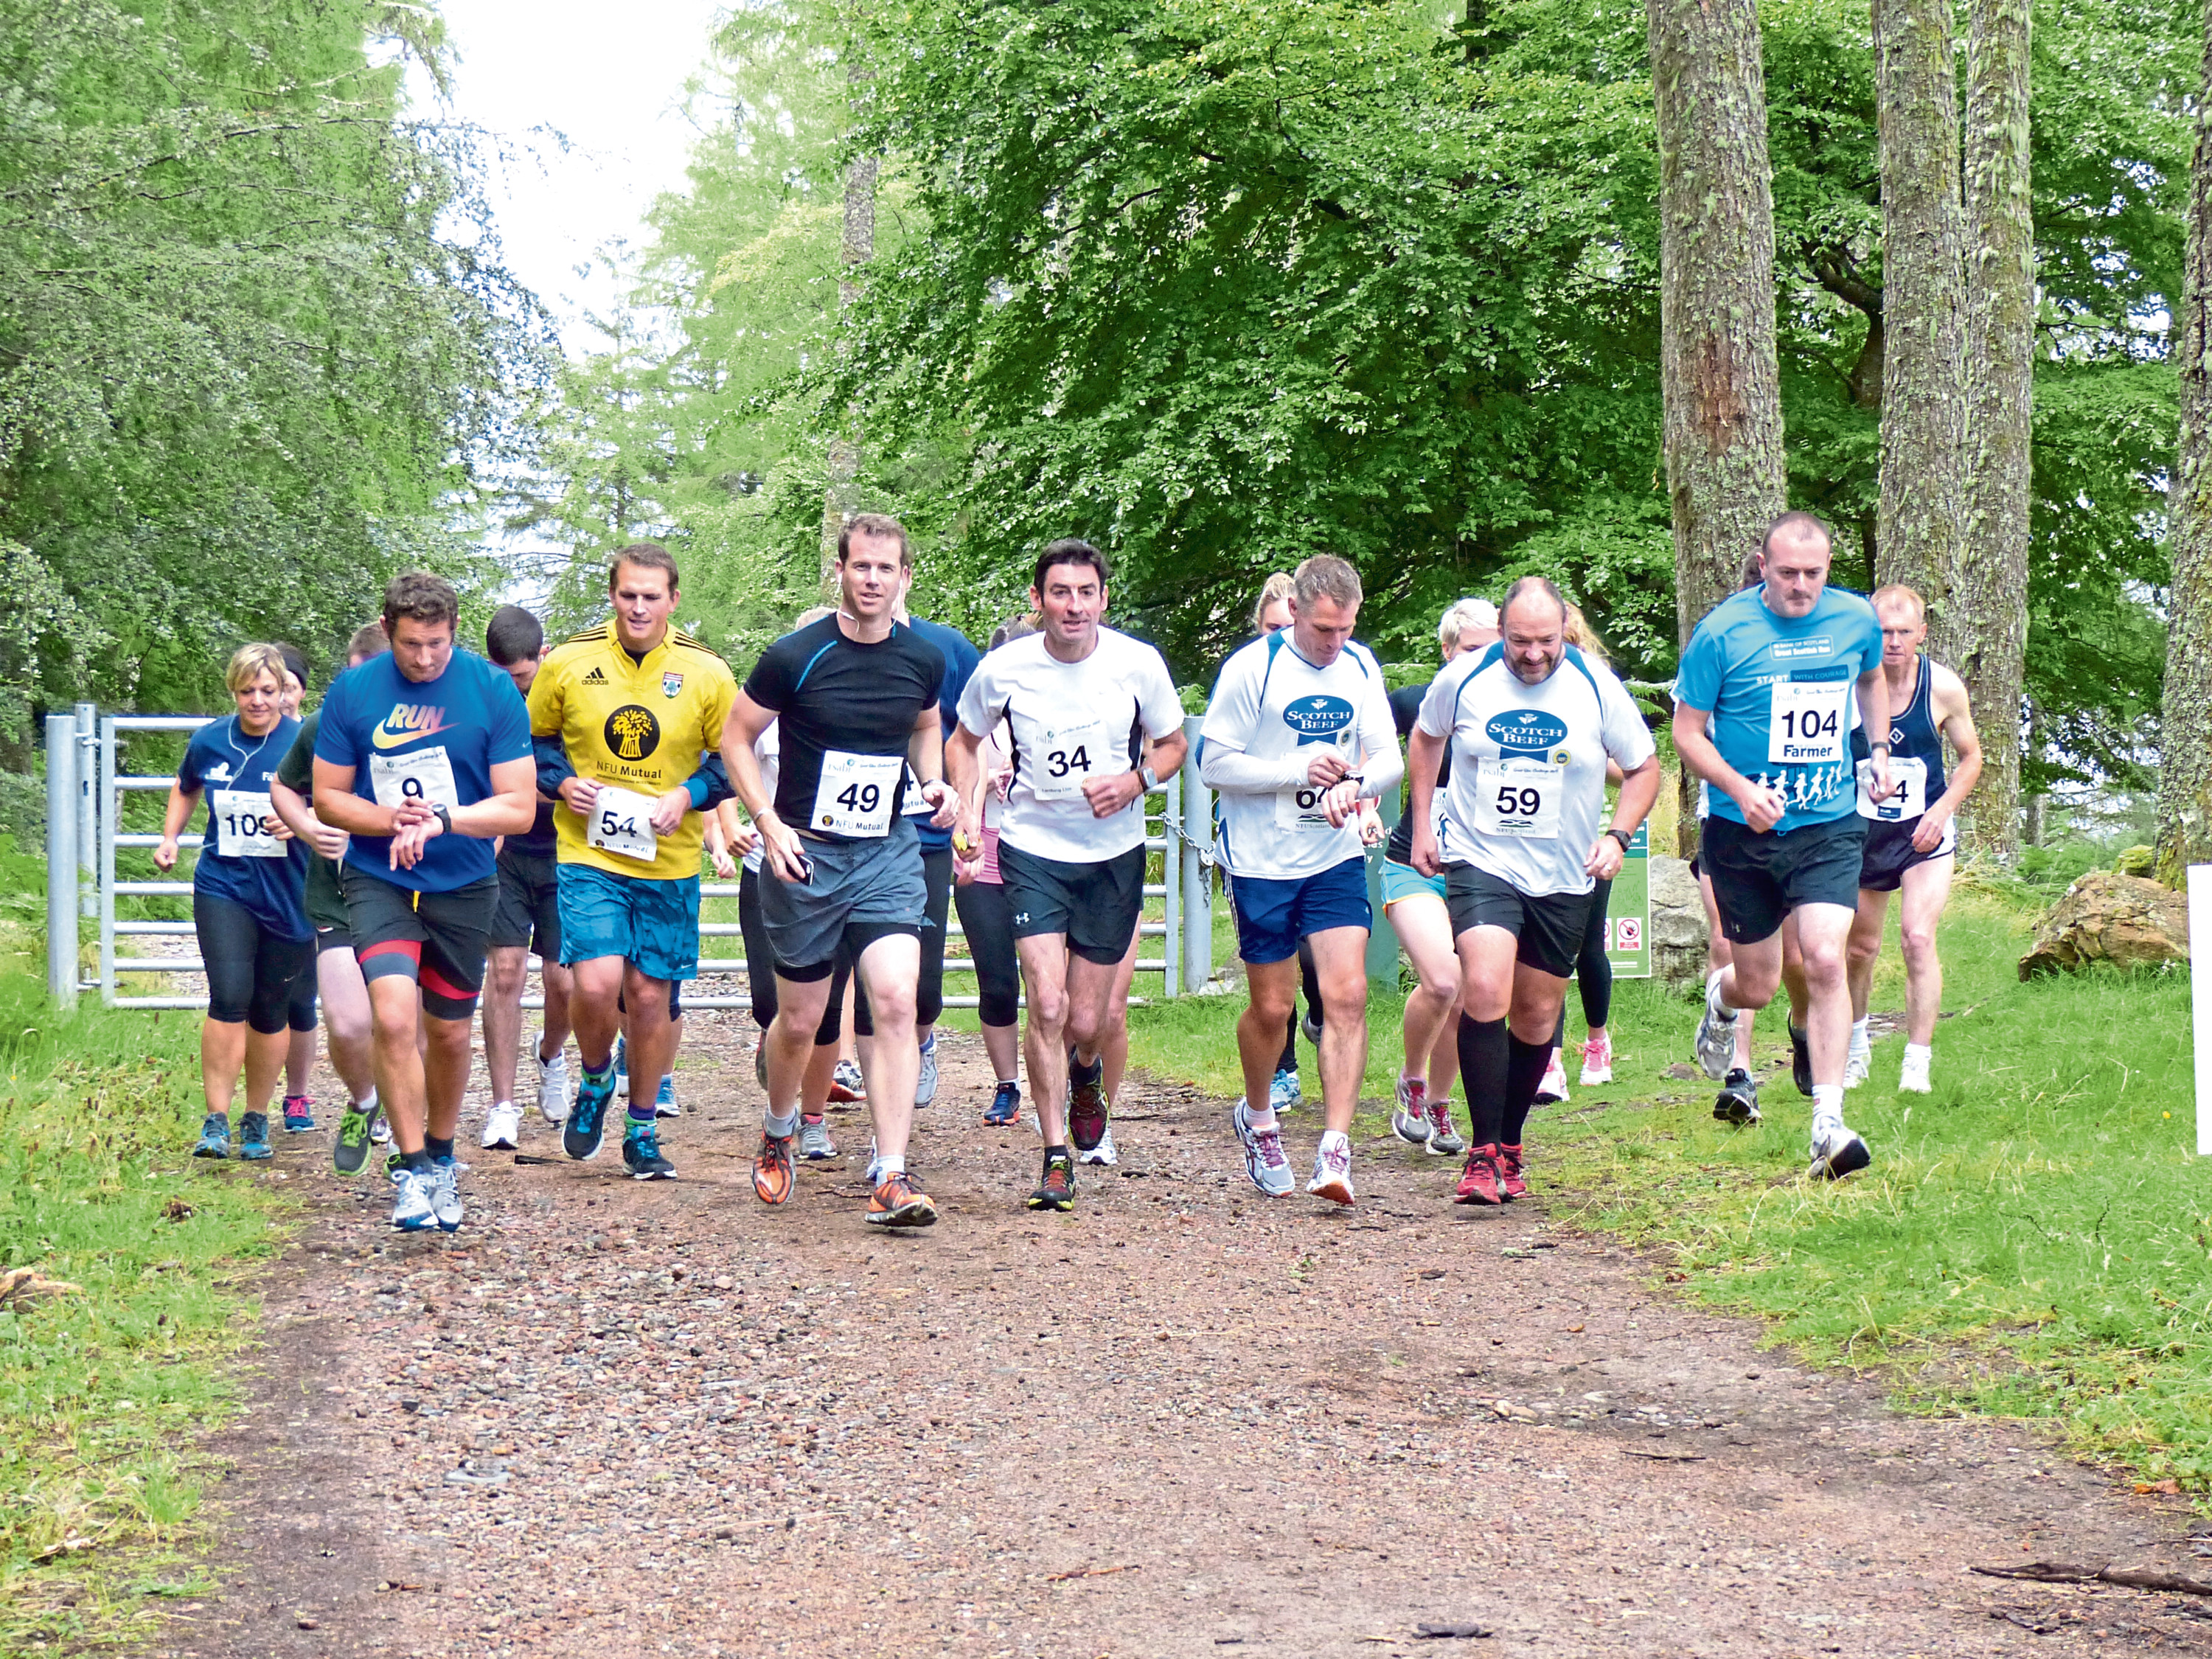 Funds are raised in various ways, including from the Great Glen Challenge.